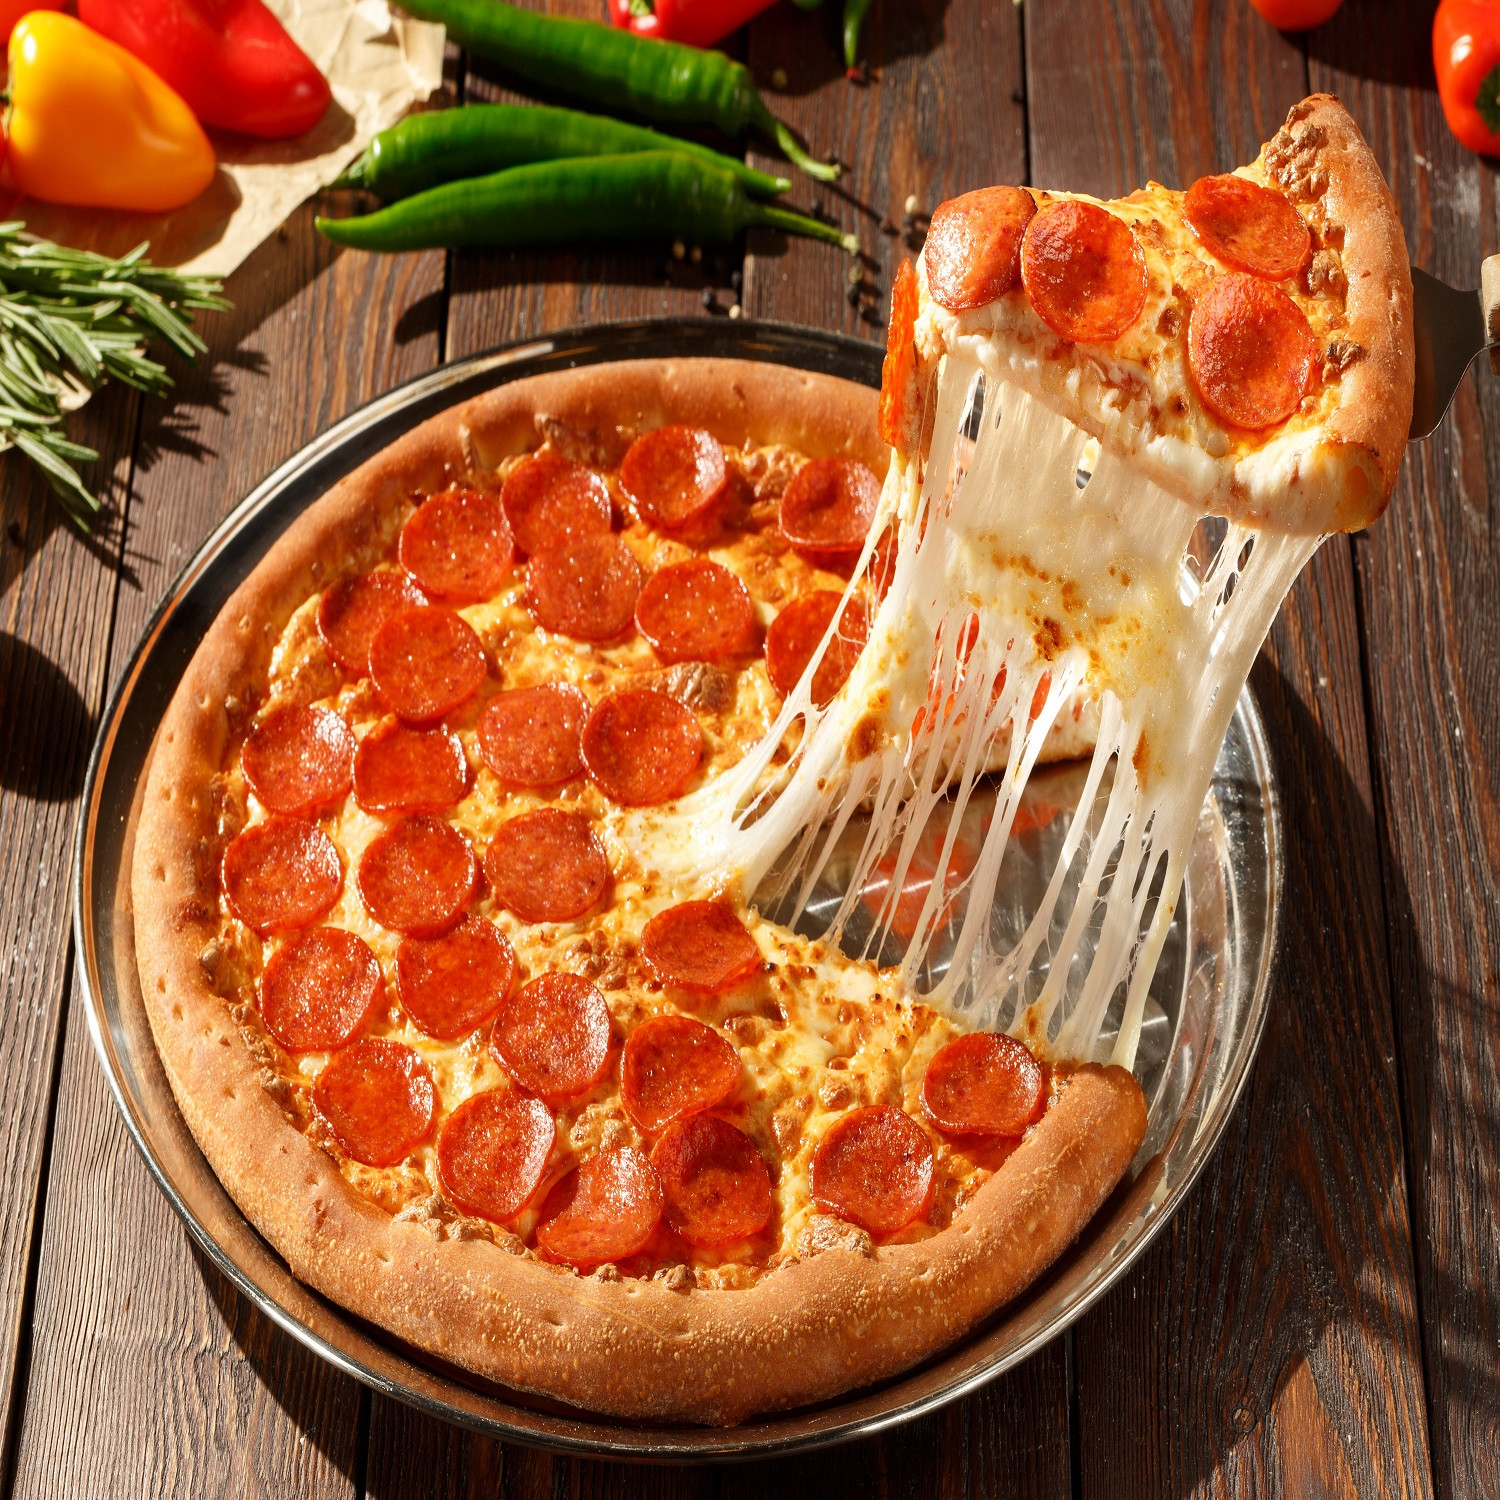 Types Of Pizza Crusts Elegant 10 Types Pizza Crusts that Would Make You Mouth Water